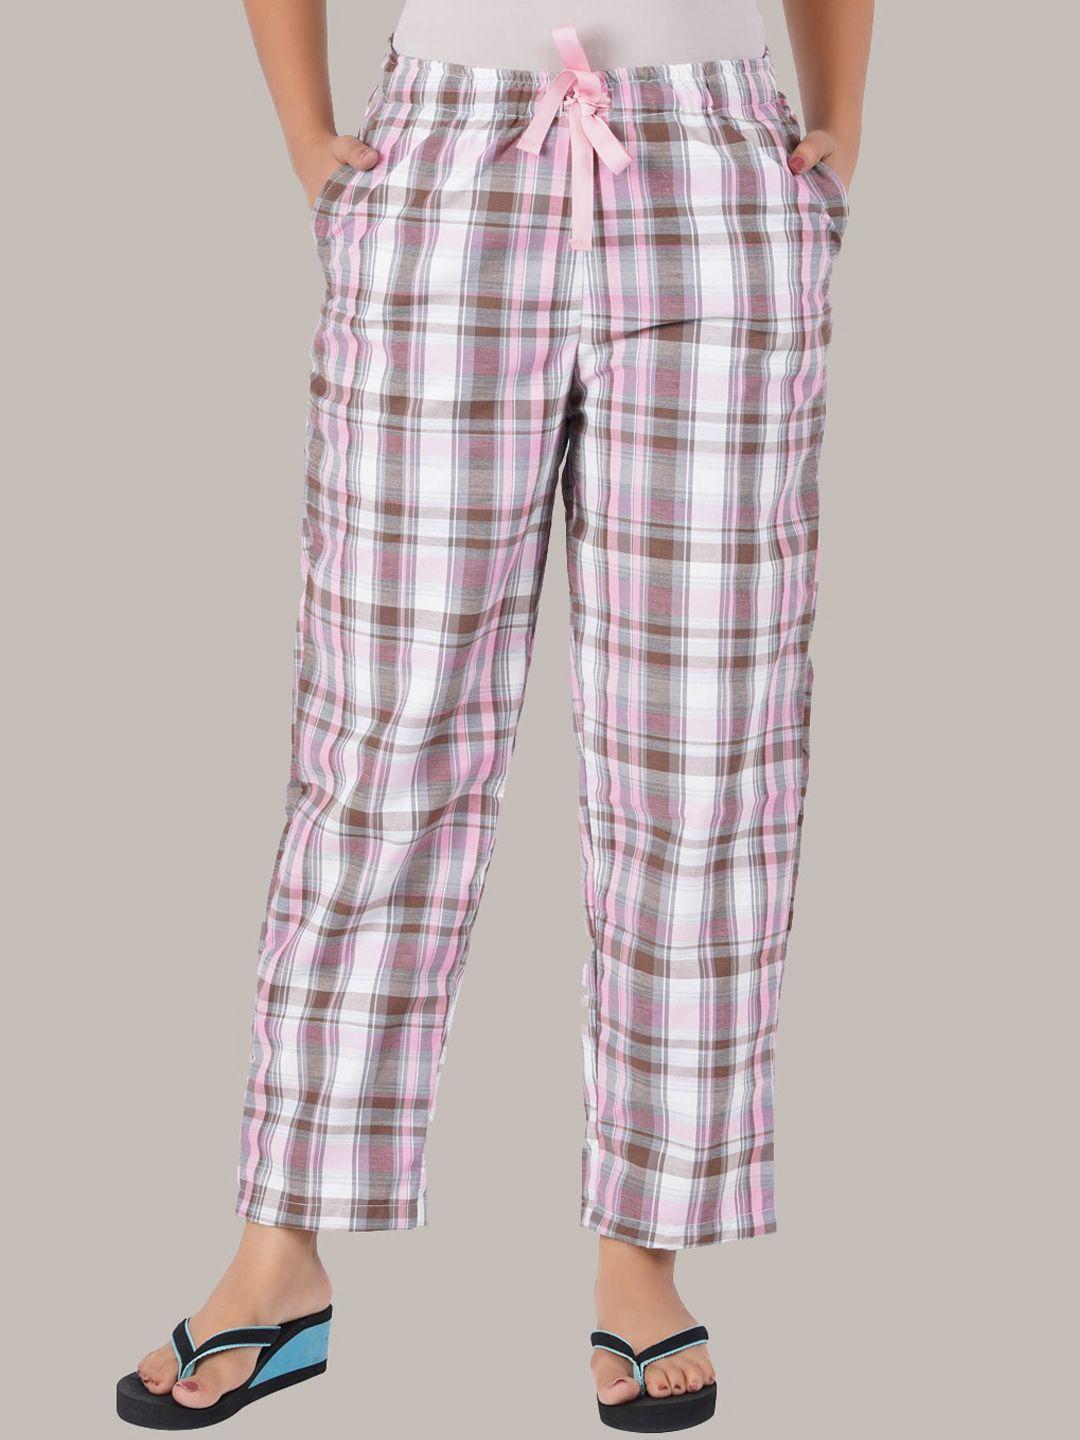 style shoes women checked cotton lounge pants